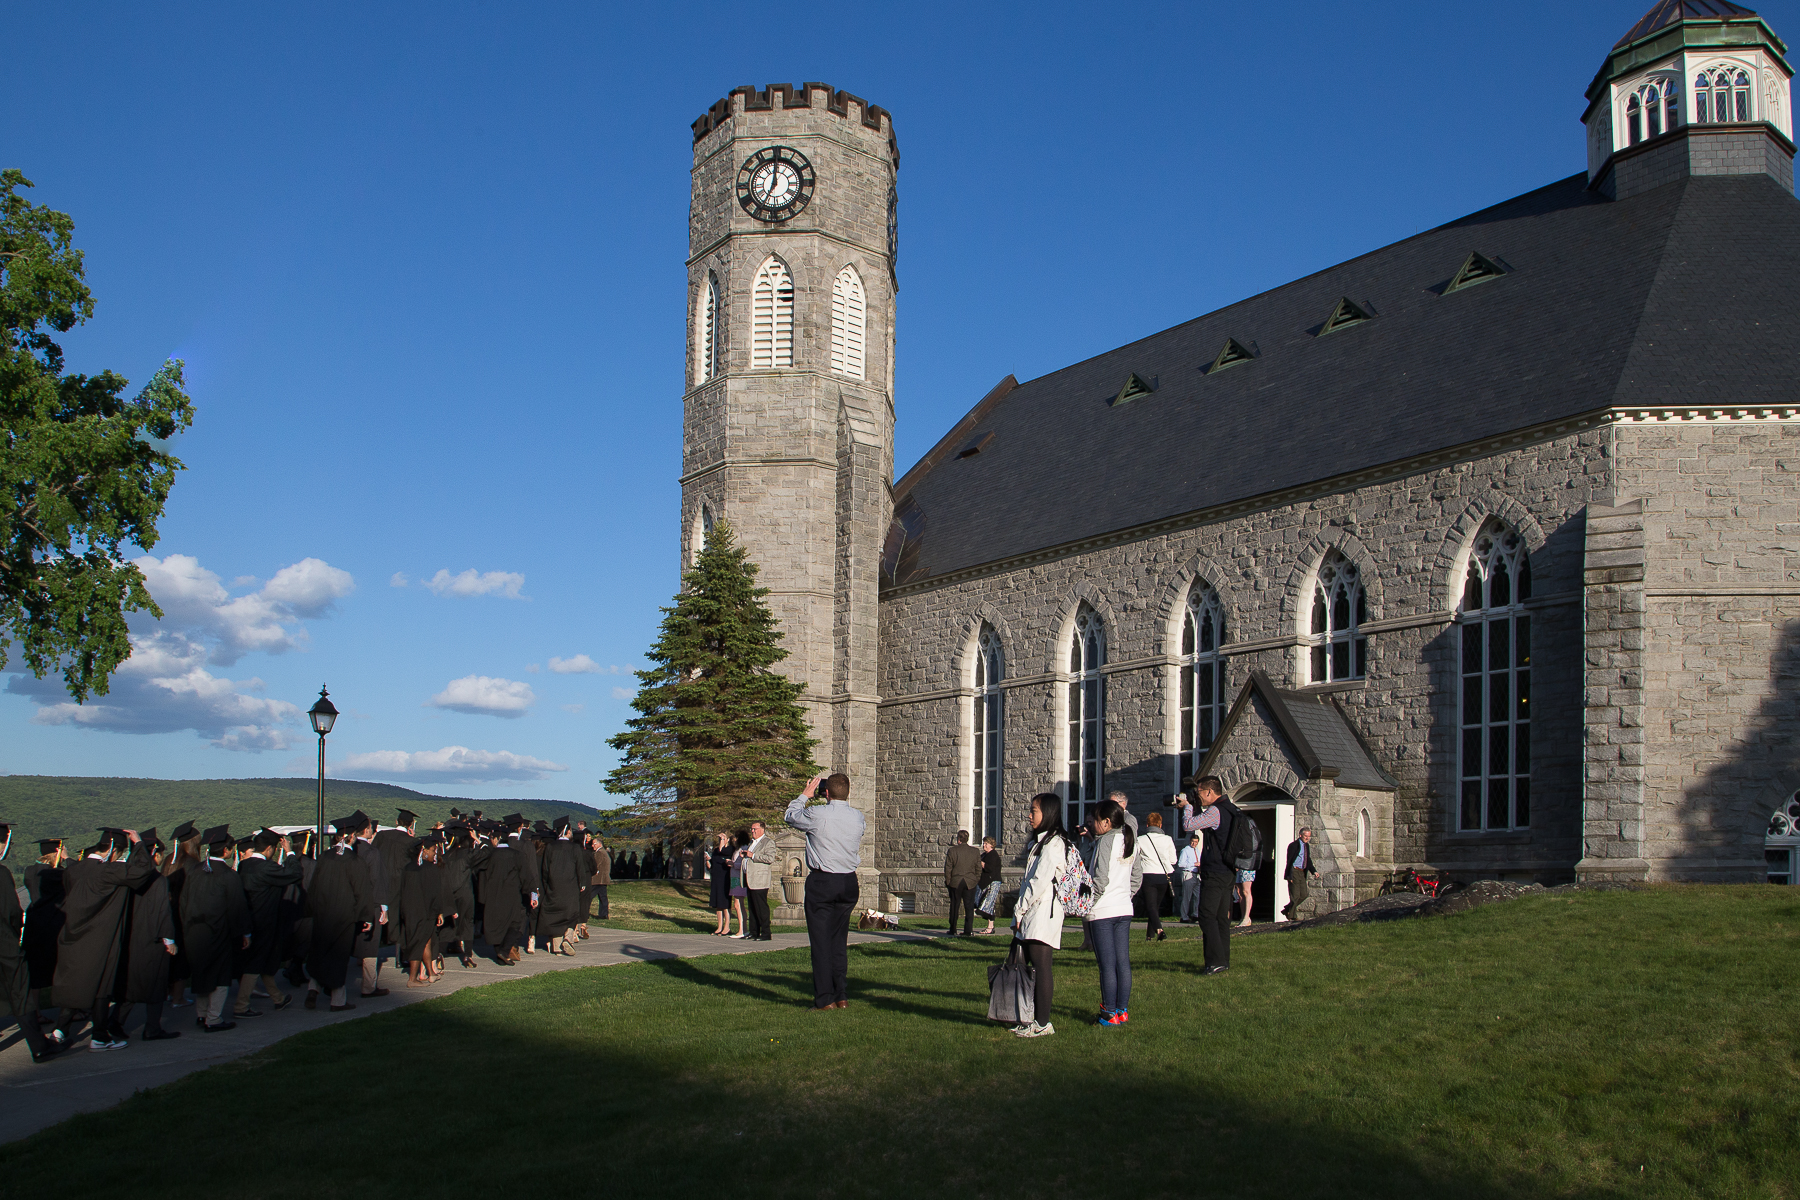 Baccalaureate Service at Northfield Mount Hermon, May 22, 2015. Photographs by Glenn Minshall.